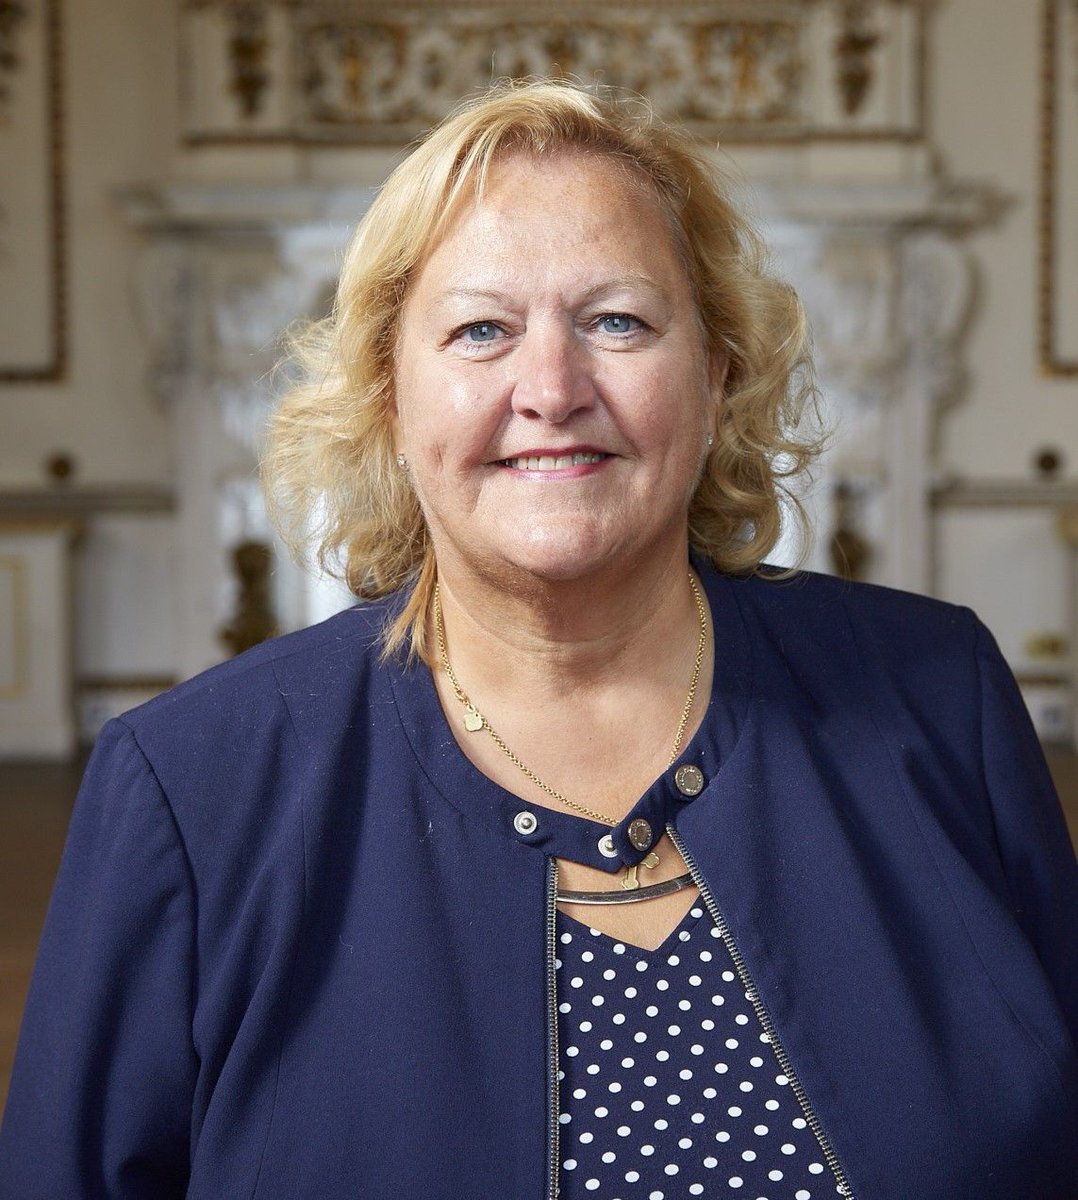 We today announce @DameJulieKenny DBE DL as Chair of our Board of Trustees. Dame Julie Kenny said: “I’m delighted to become Chair of the Sheffield Theatres Board. Sheffield Theatres is a force, nationally and locally.' Read more here: bit.ly/4ddxGUC